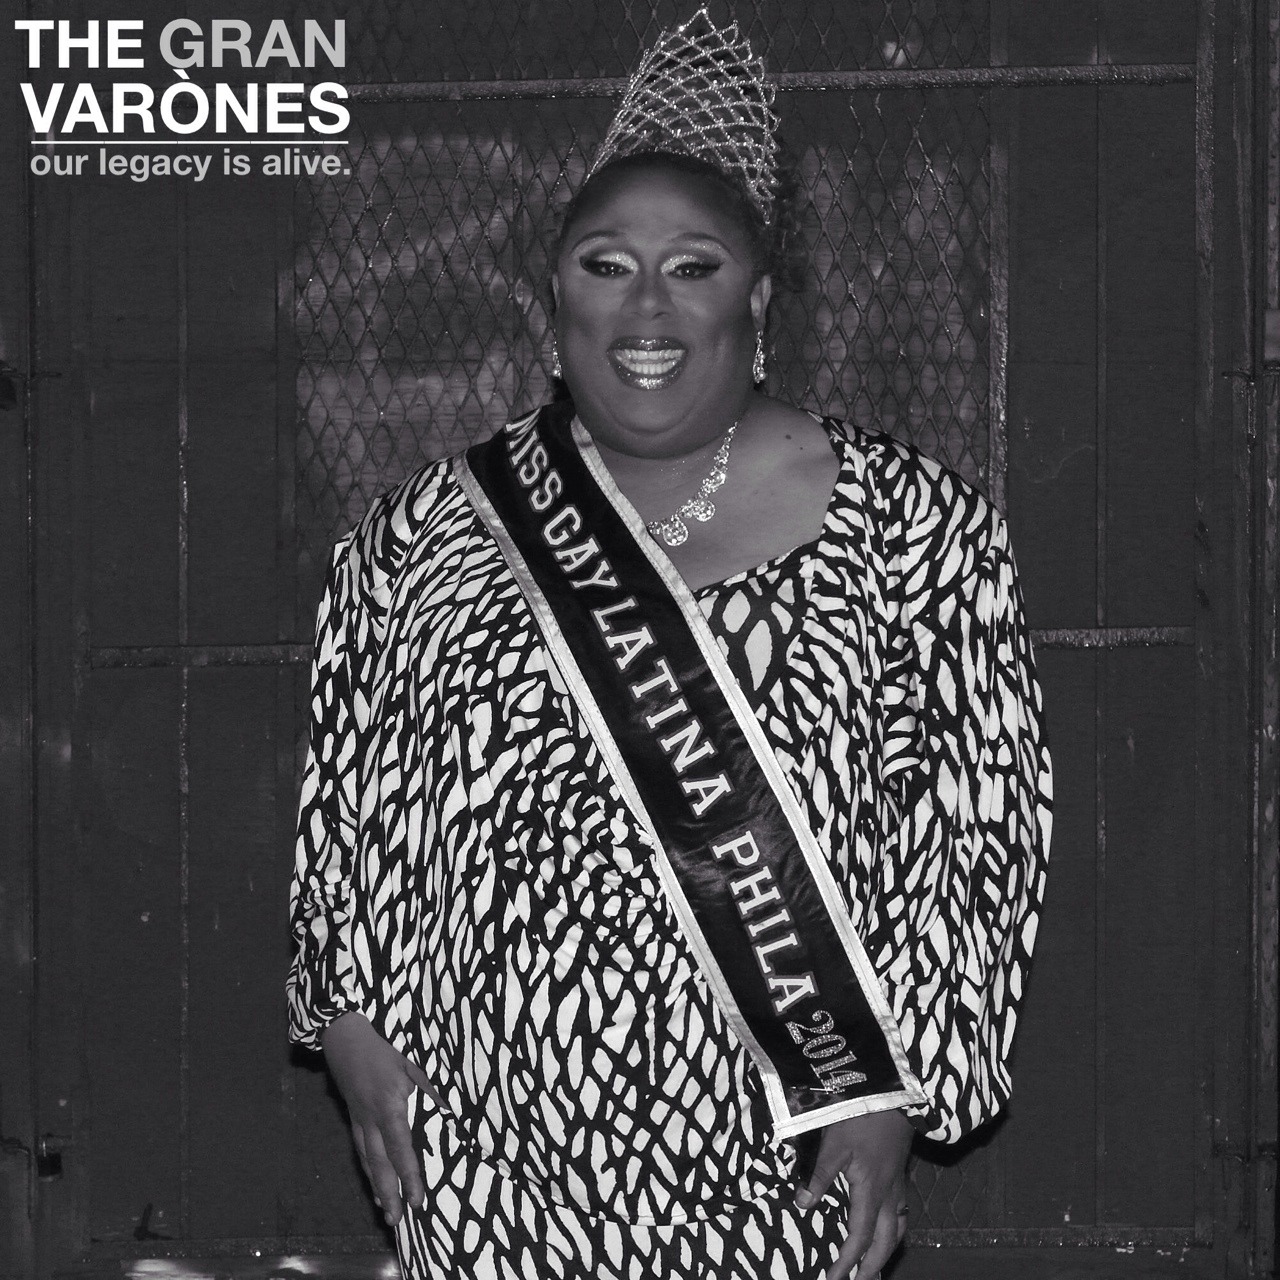 “Back then, you could’t walk in North Philly being gay without getting beat up. I used to get in trouble because I fought the boys back down. So I started doing drag as a getaway. I am where I am right now and I owe it to Lady Labelle.”
- Mangual aka...